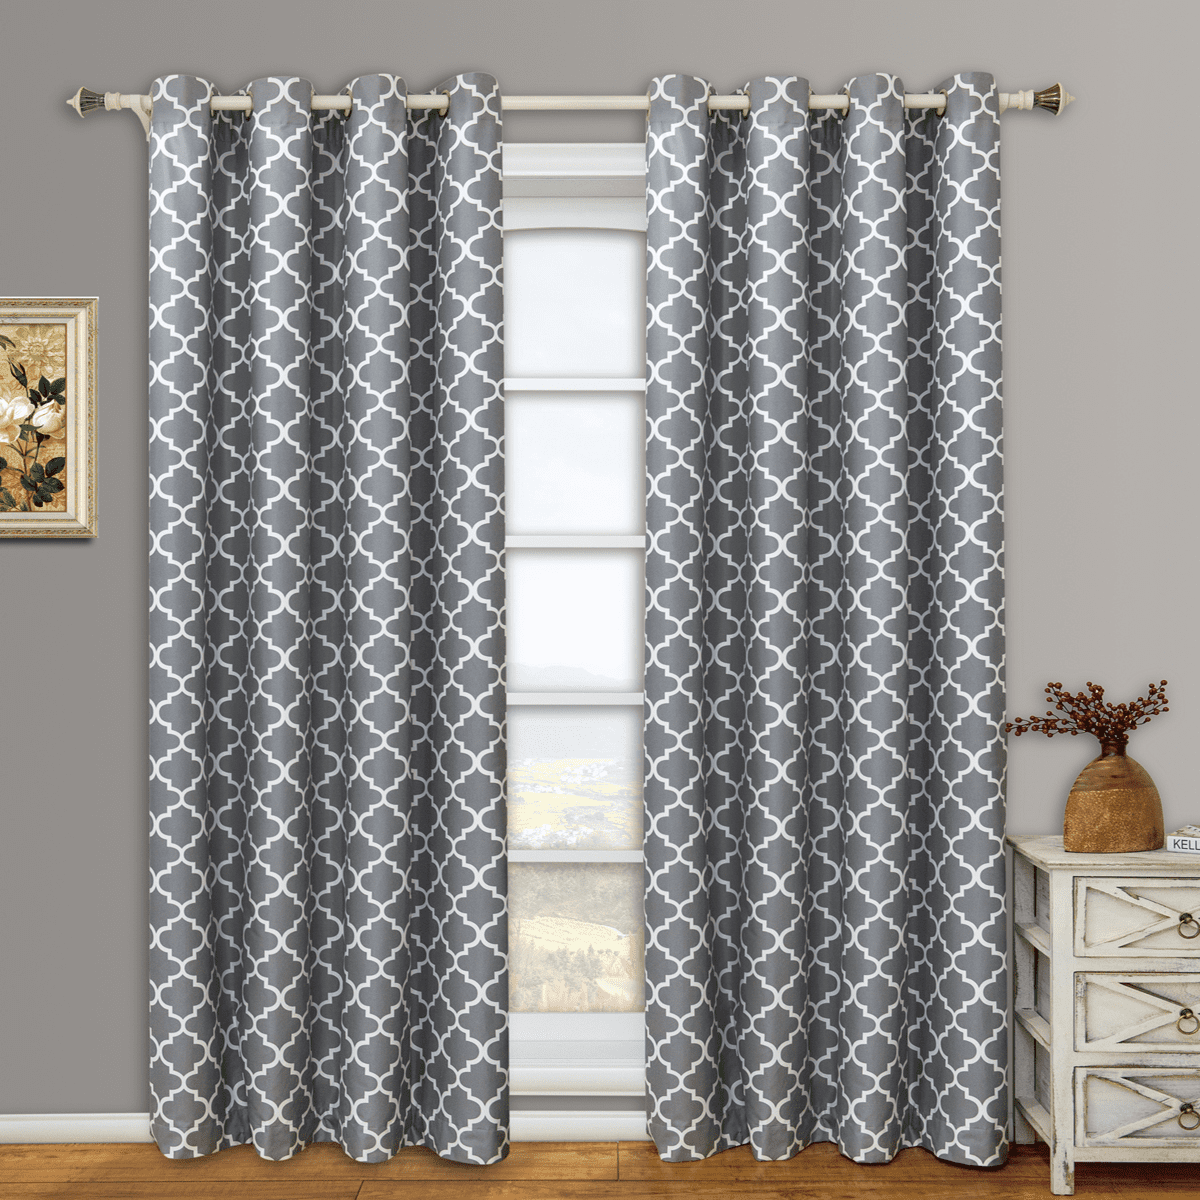 Set of 2 Mansoon Woven Jacquard Insulated Blackout Curtain Panels 76" W x 84"L 